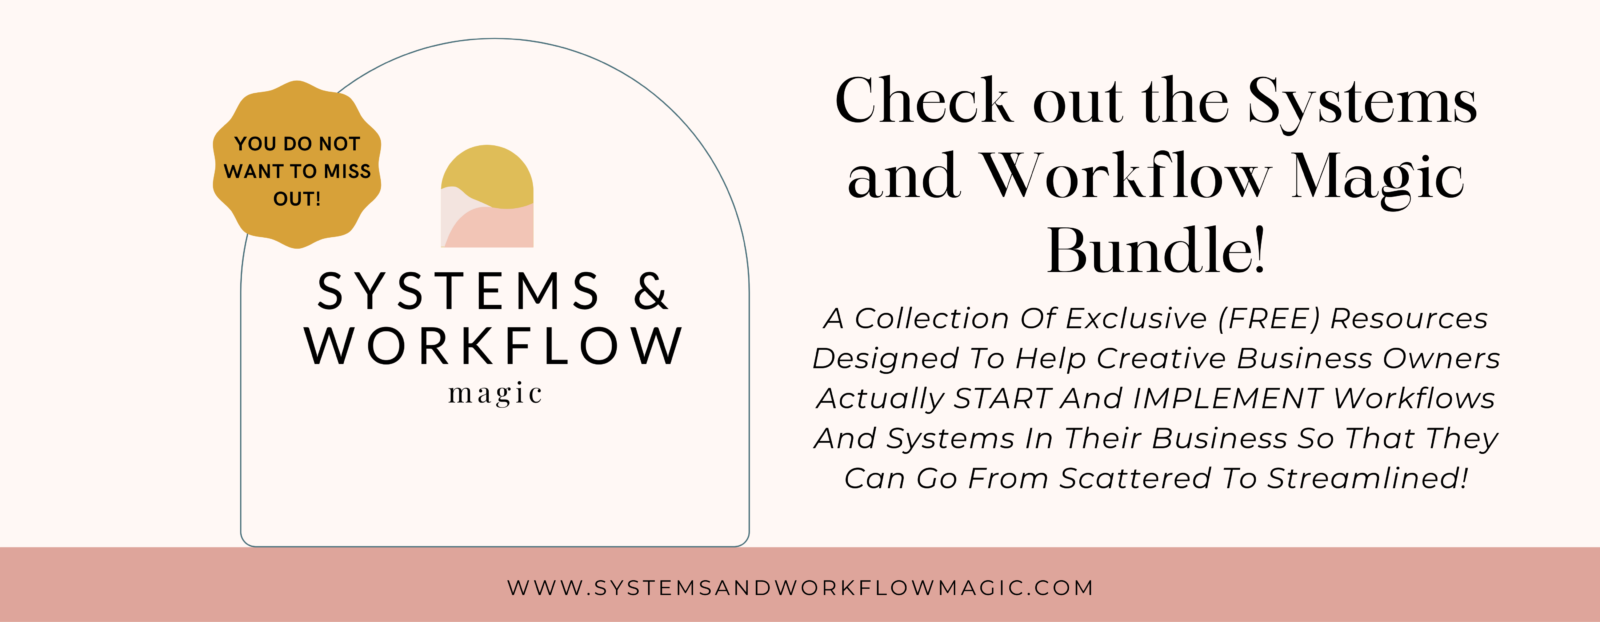 Check out the systems and workflow magic bundle here